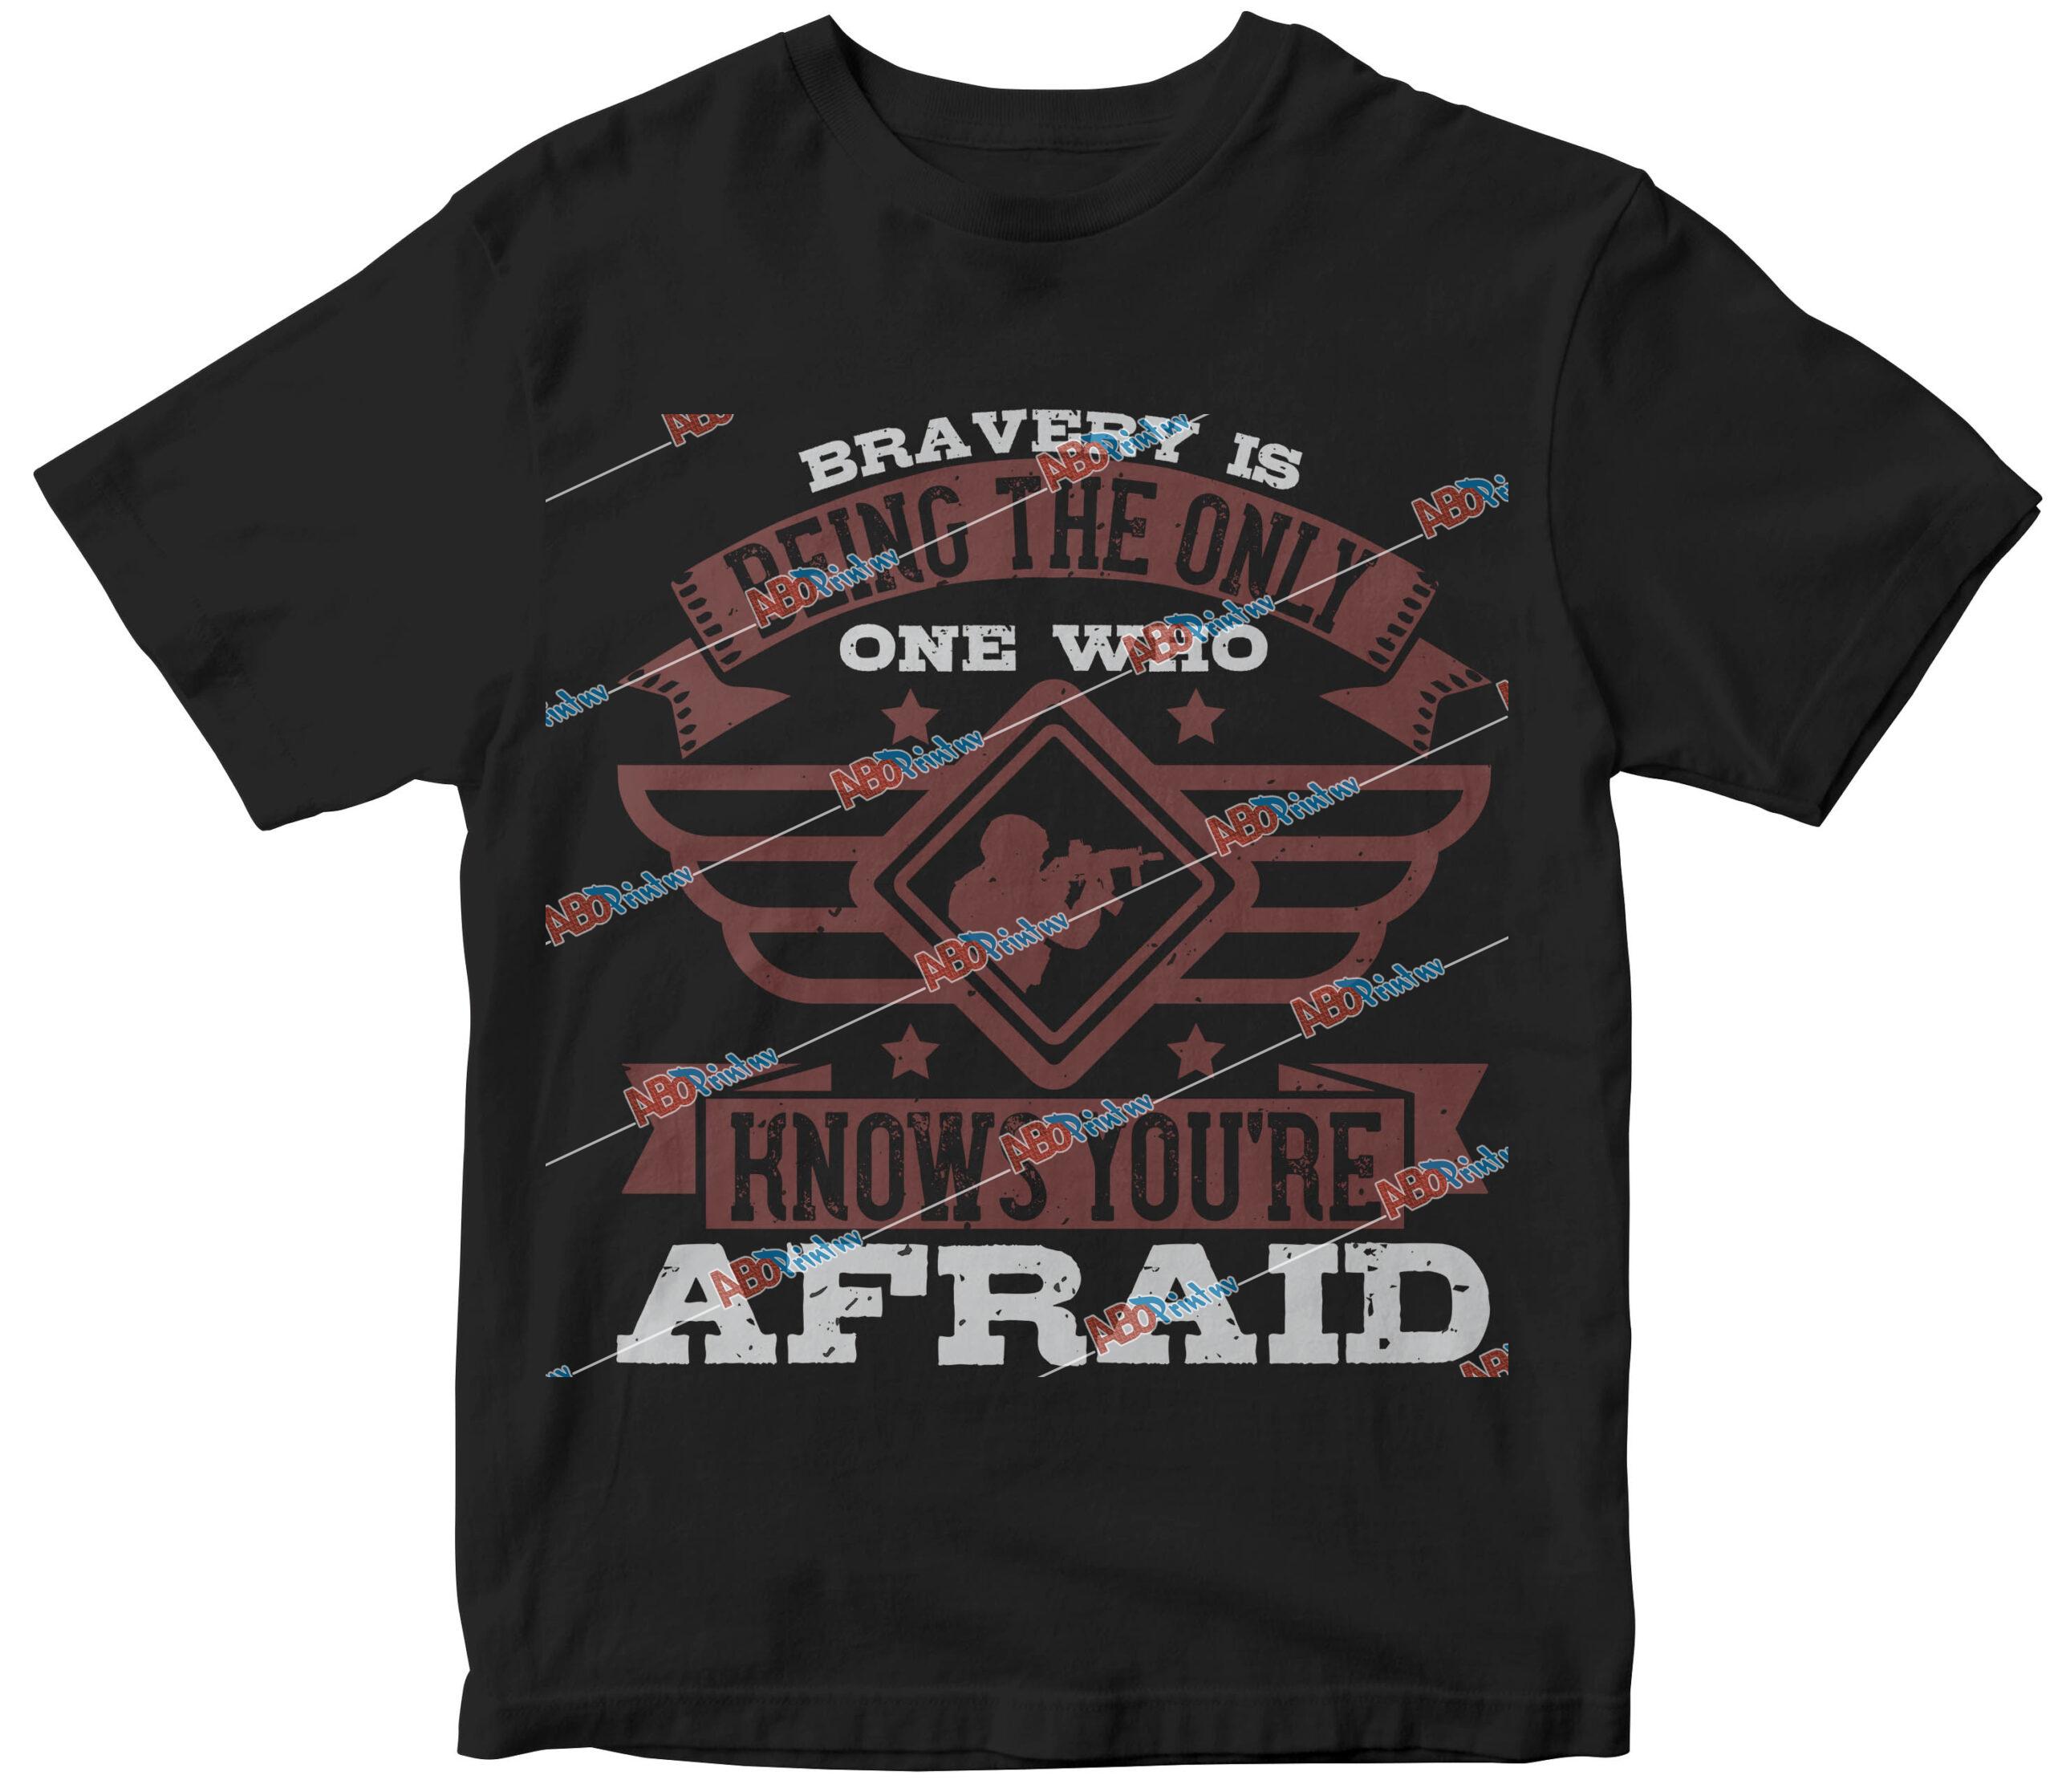 Bravery is being the only one who knows youÔÇÖre afraid.jpg